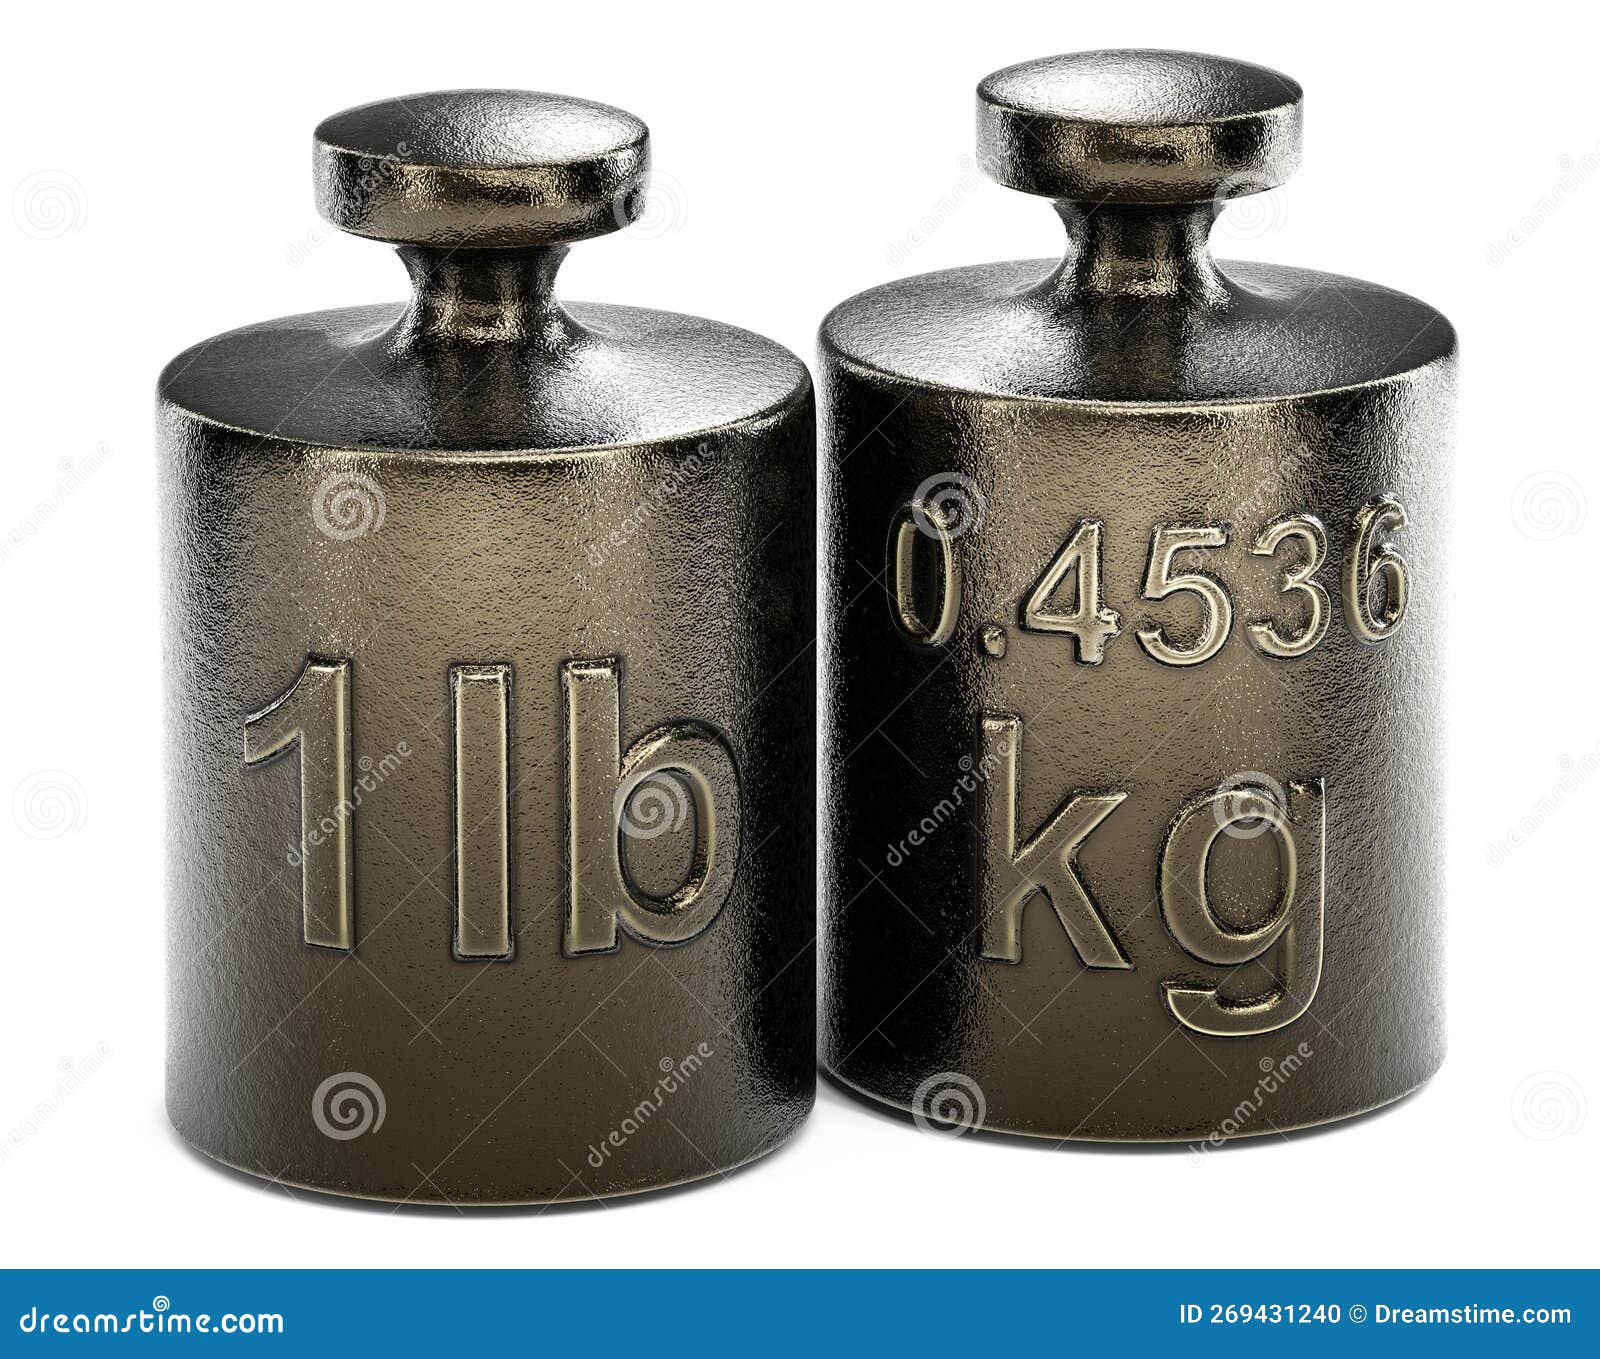 convert one pound to kilograms. weight concept